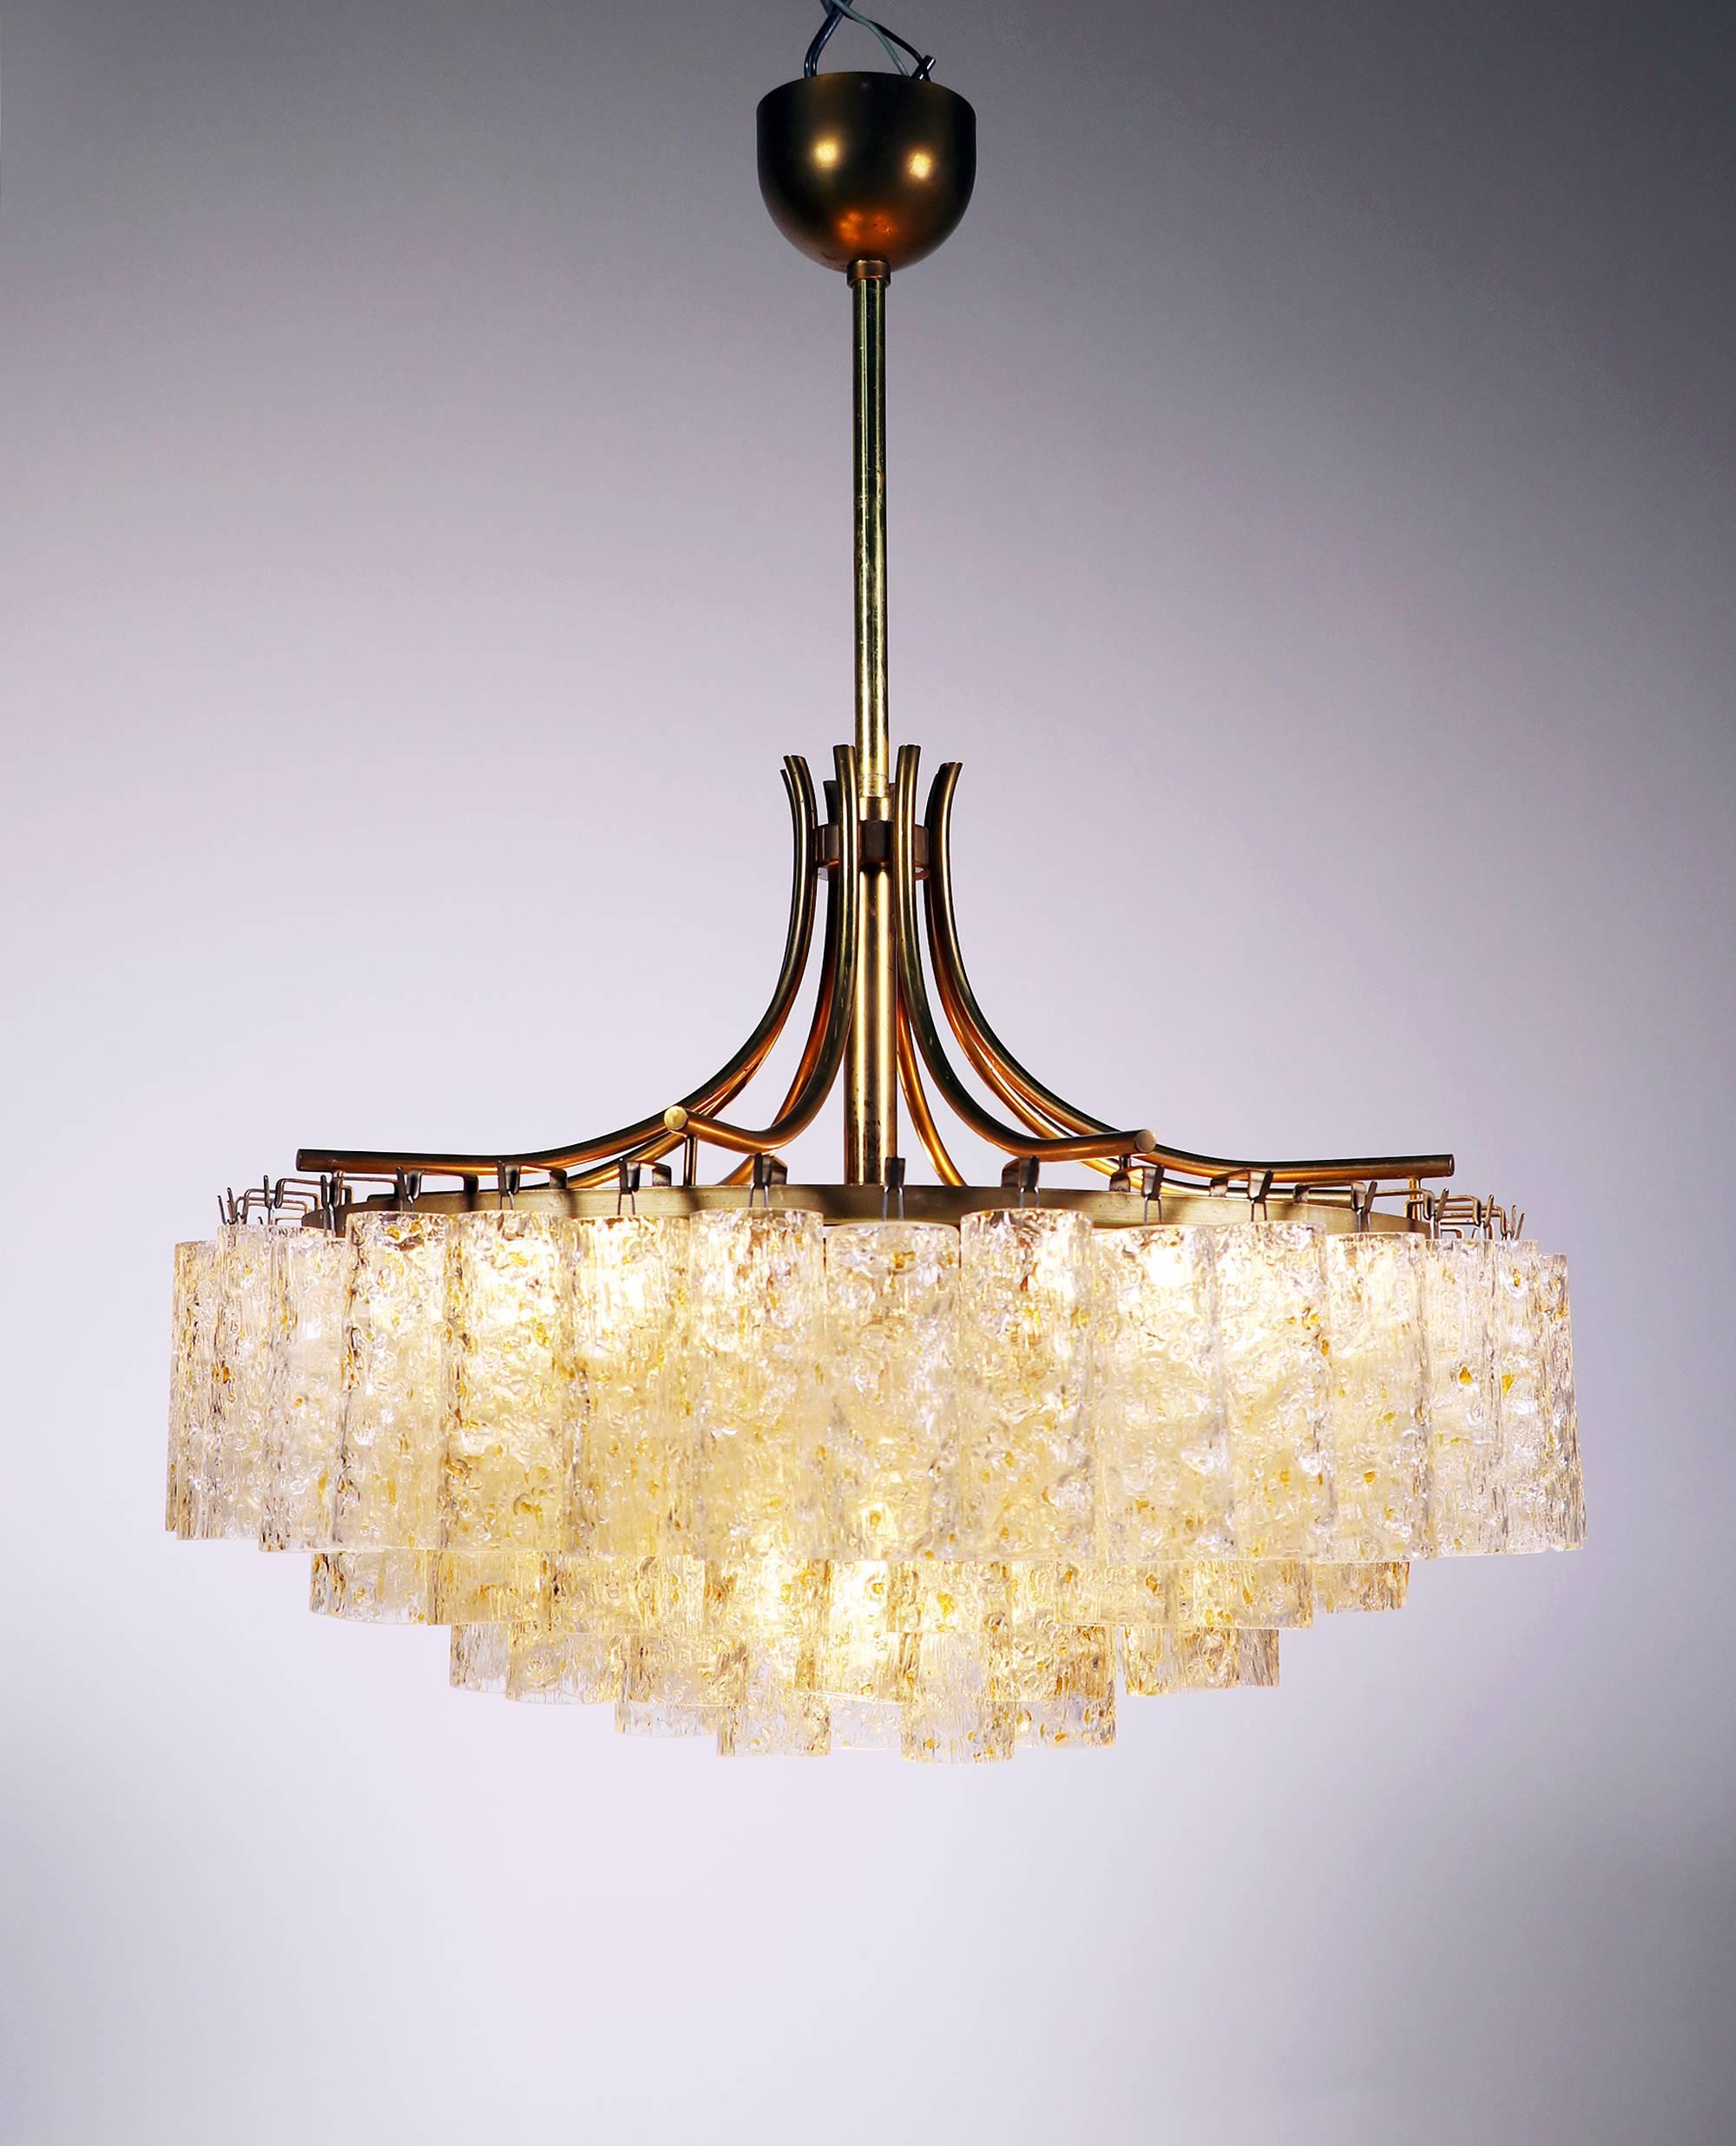 Large chandelier with 78 gold flaked Murano glass tubes on a brass frame.
Made by Doria, Germany in the 1960s. 
The lamp takes nine small Edison bulbs, one in the middle and eight bulbs around.
One replacement part is included.
Diameter 19.7 in / 50